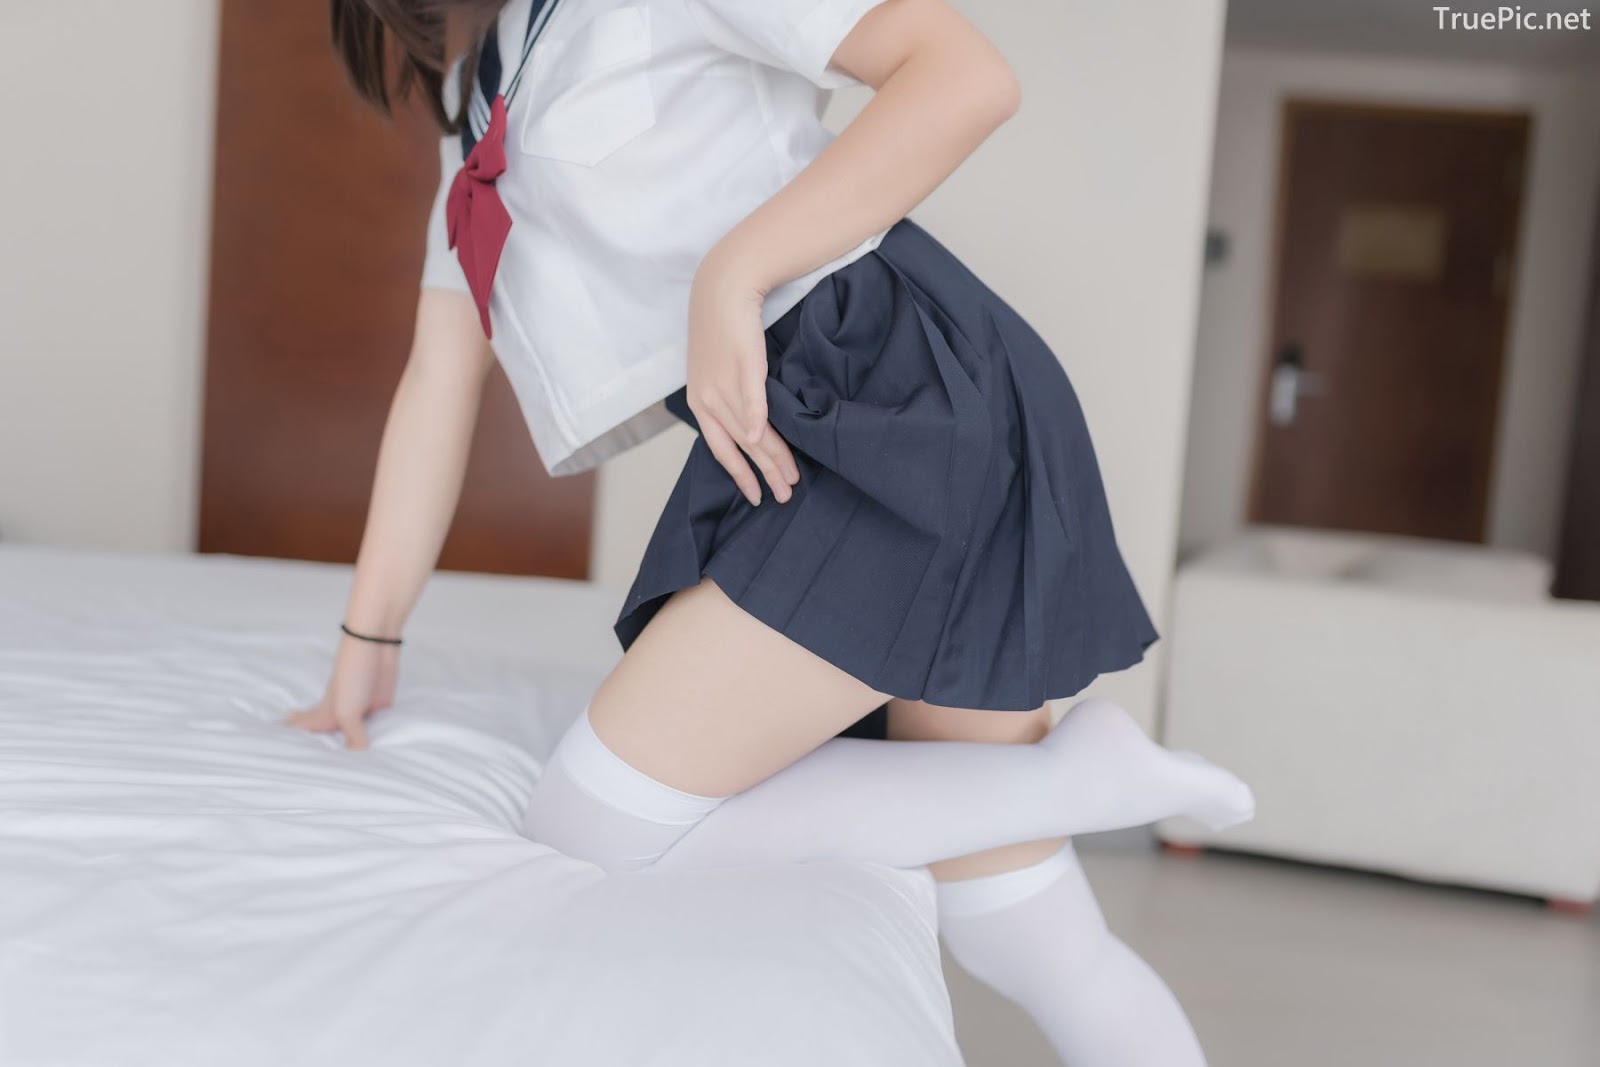 [MTCos] 喵糖映画 Vol.002 - Chinese model - Cosplay Japanese School Girl Student with Cat Hairband